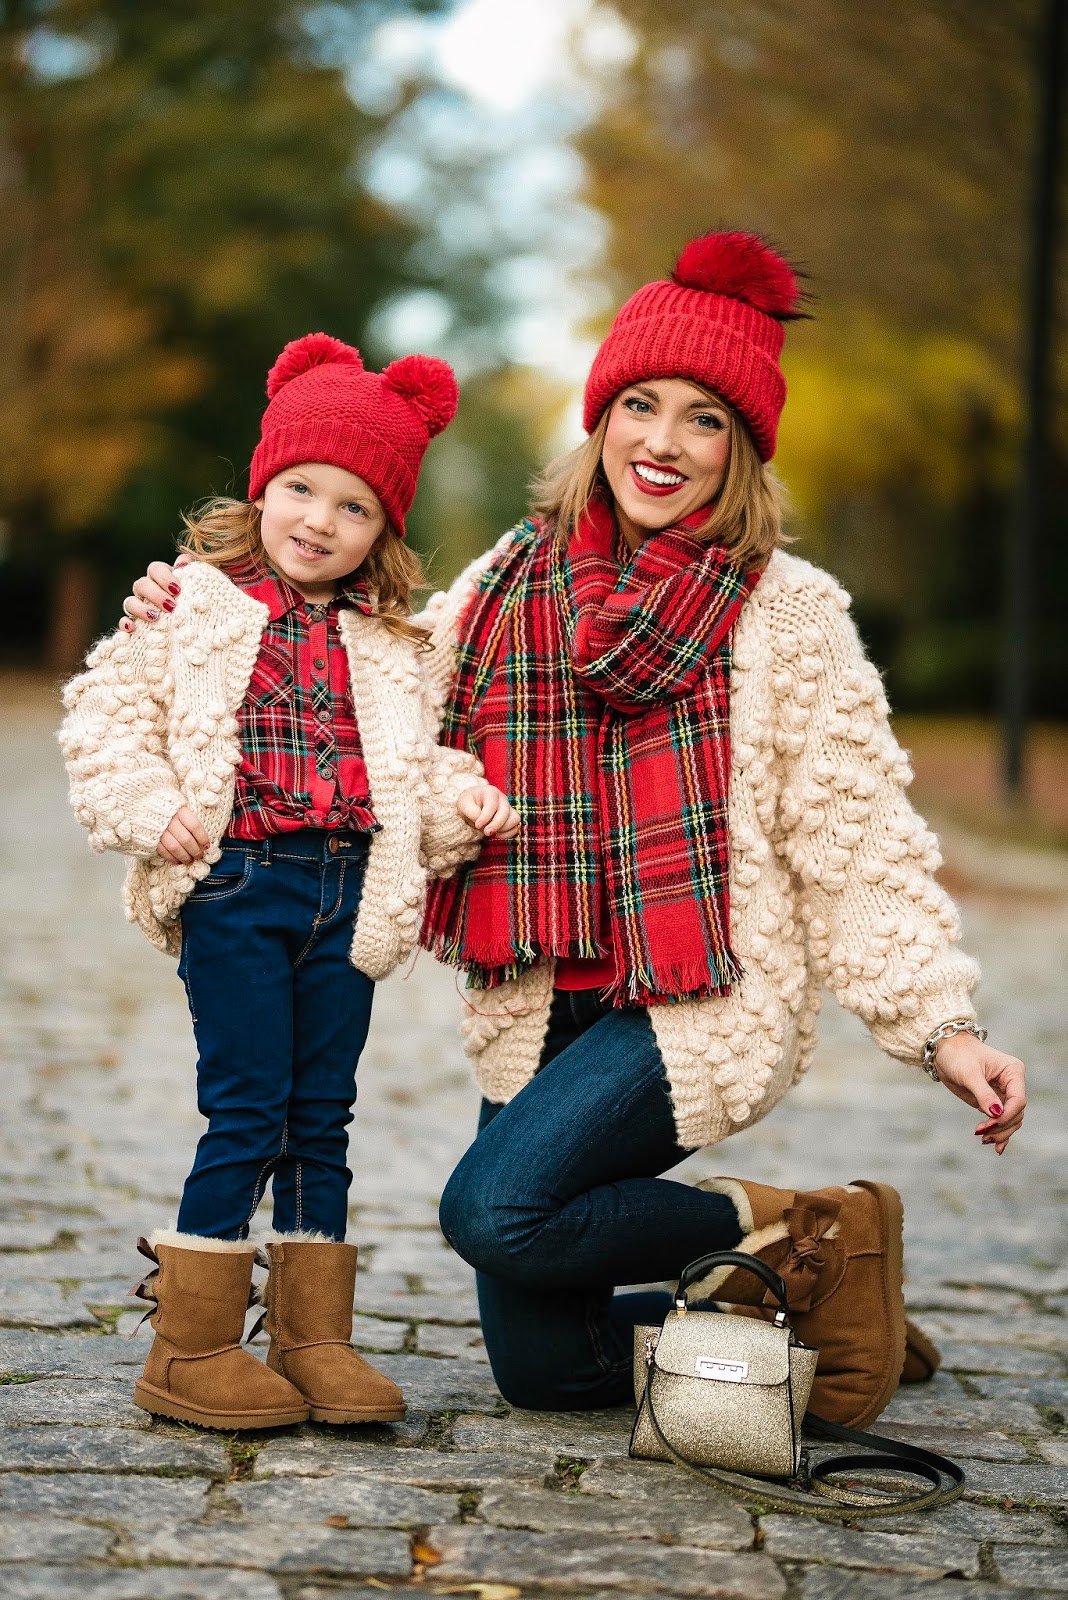 Mommy & Me in Heart Cardigans & Plaid - Something Delightful Blog